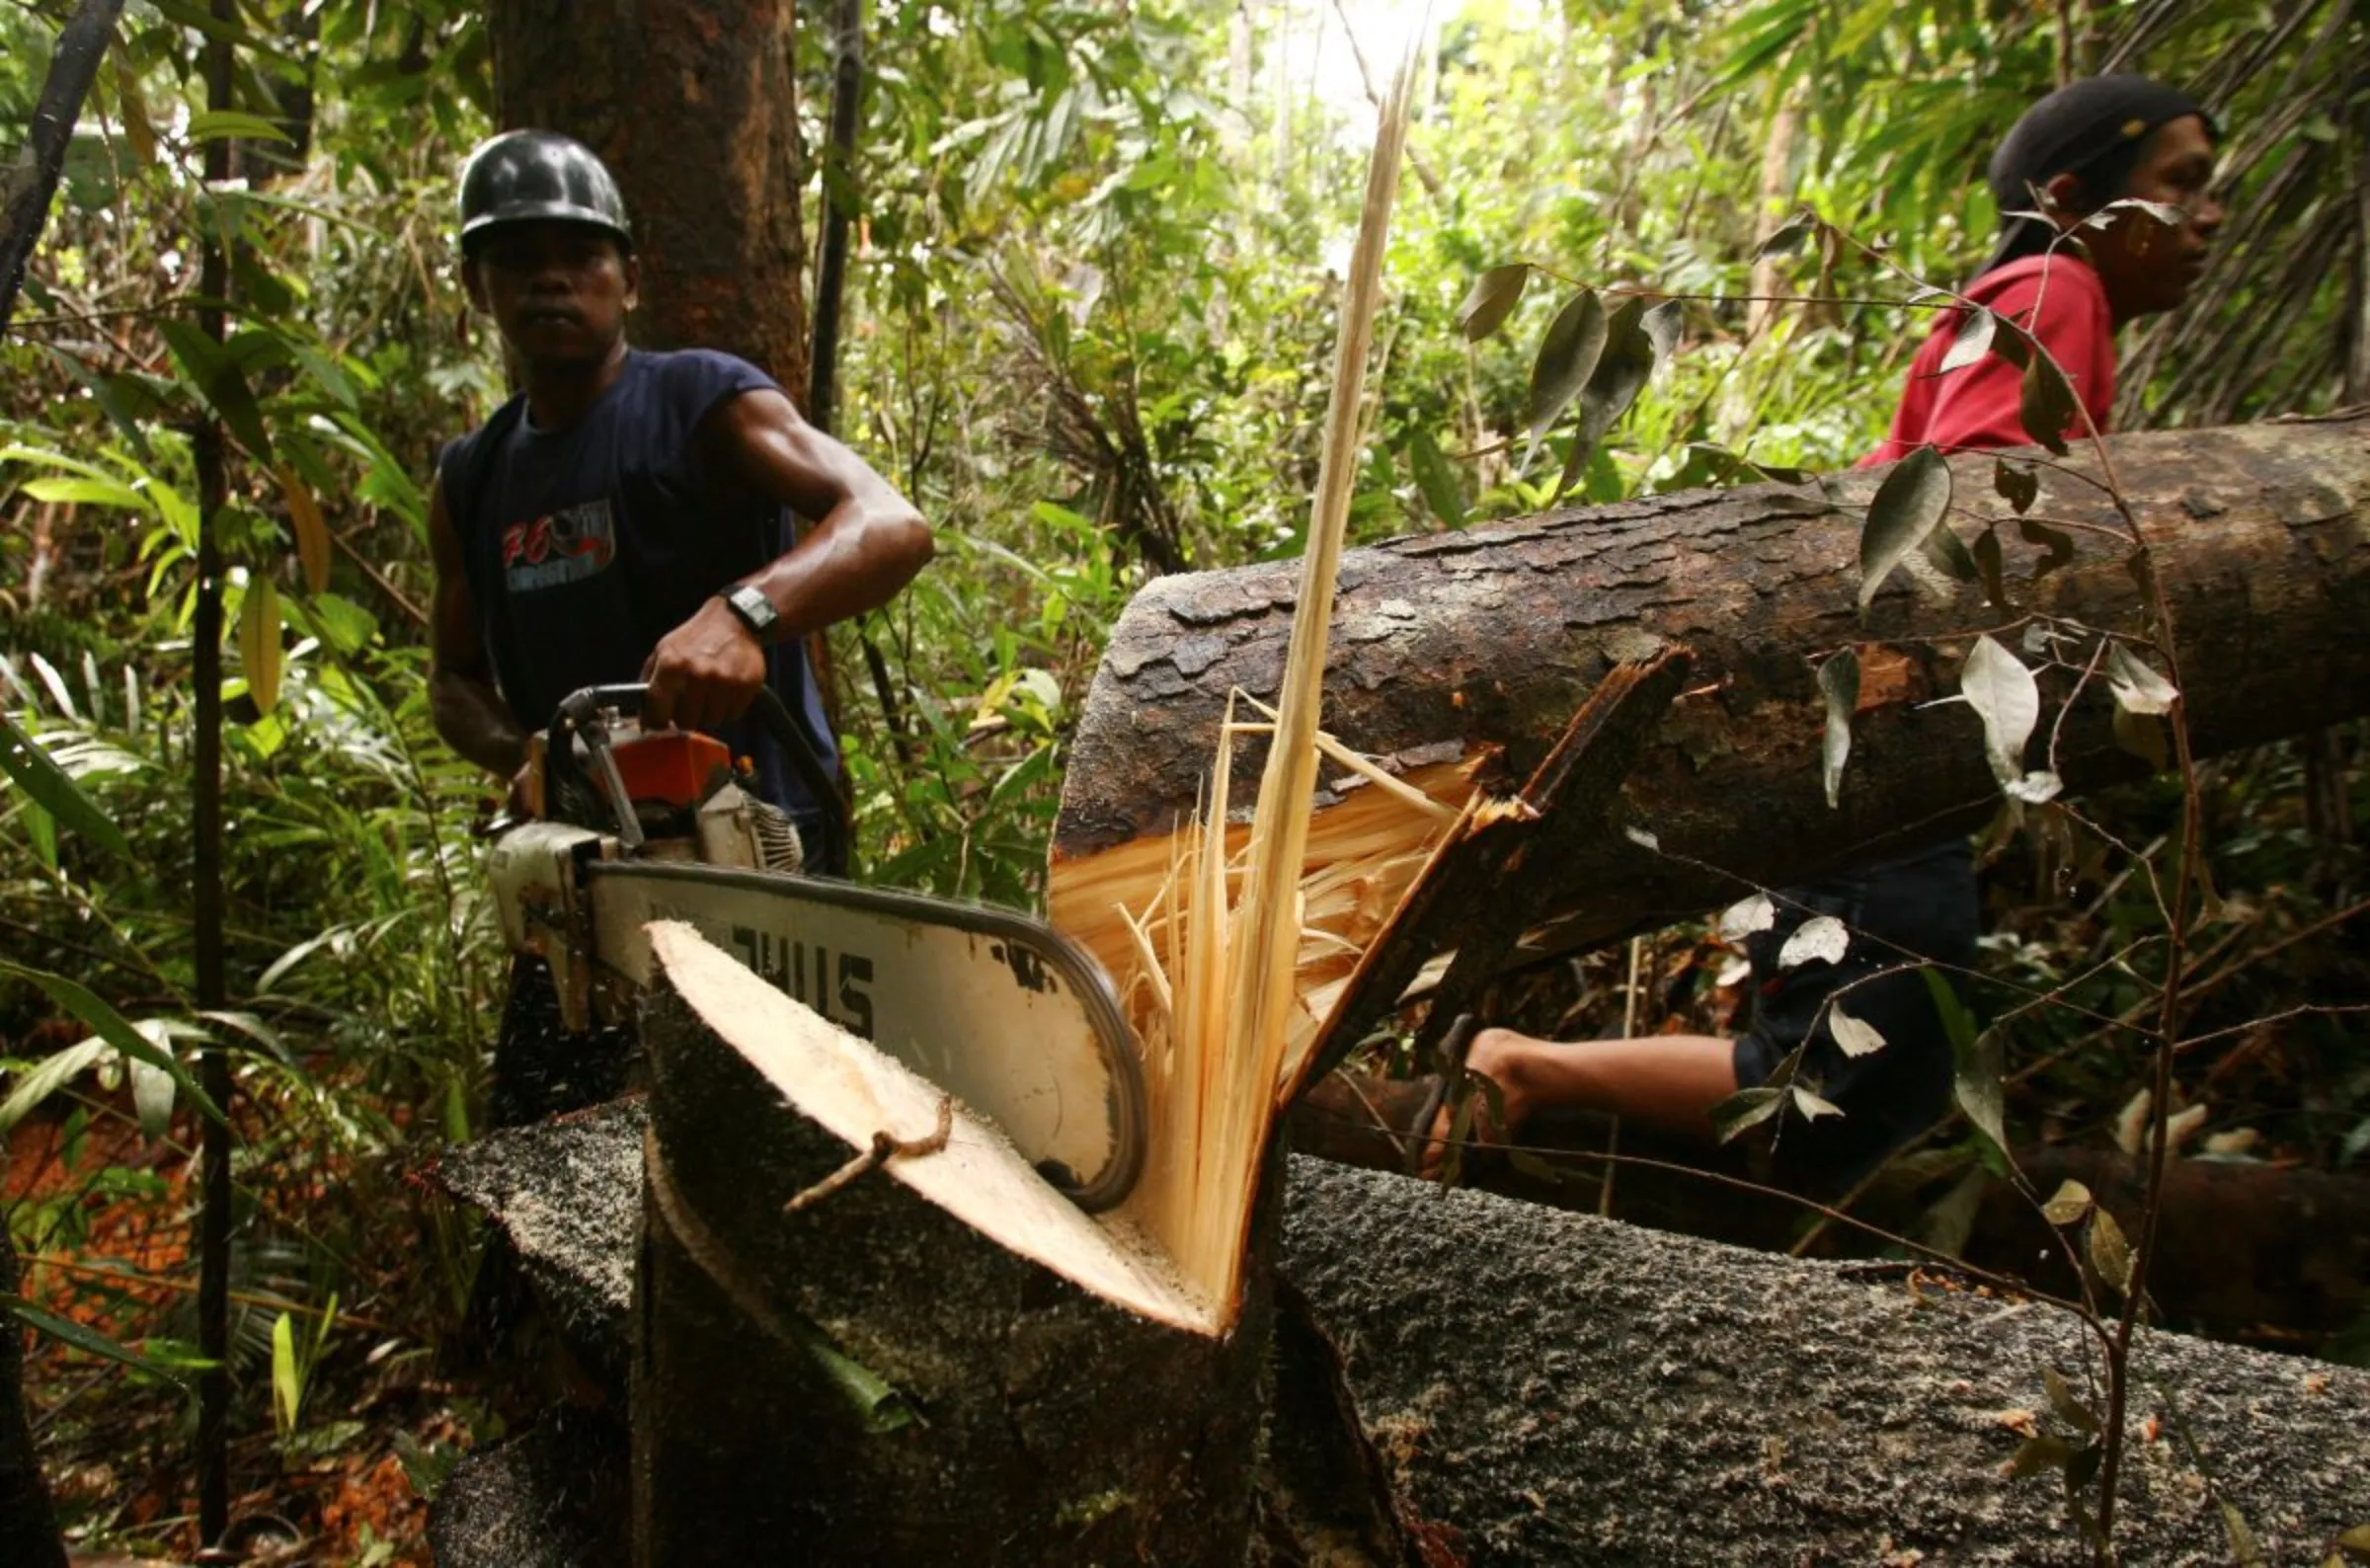 A villager illegally cuts down a tree in a forest in the North Kolaka district of Indonesia's South Sulawesi province November 5, 2010. REUTERS/Yusuf Ahmad